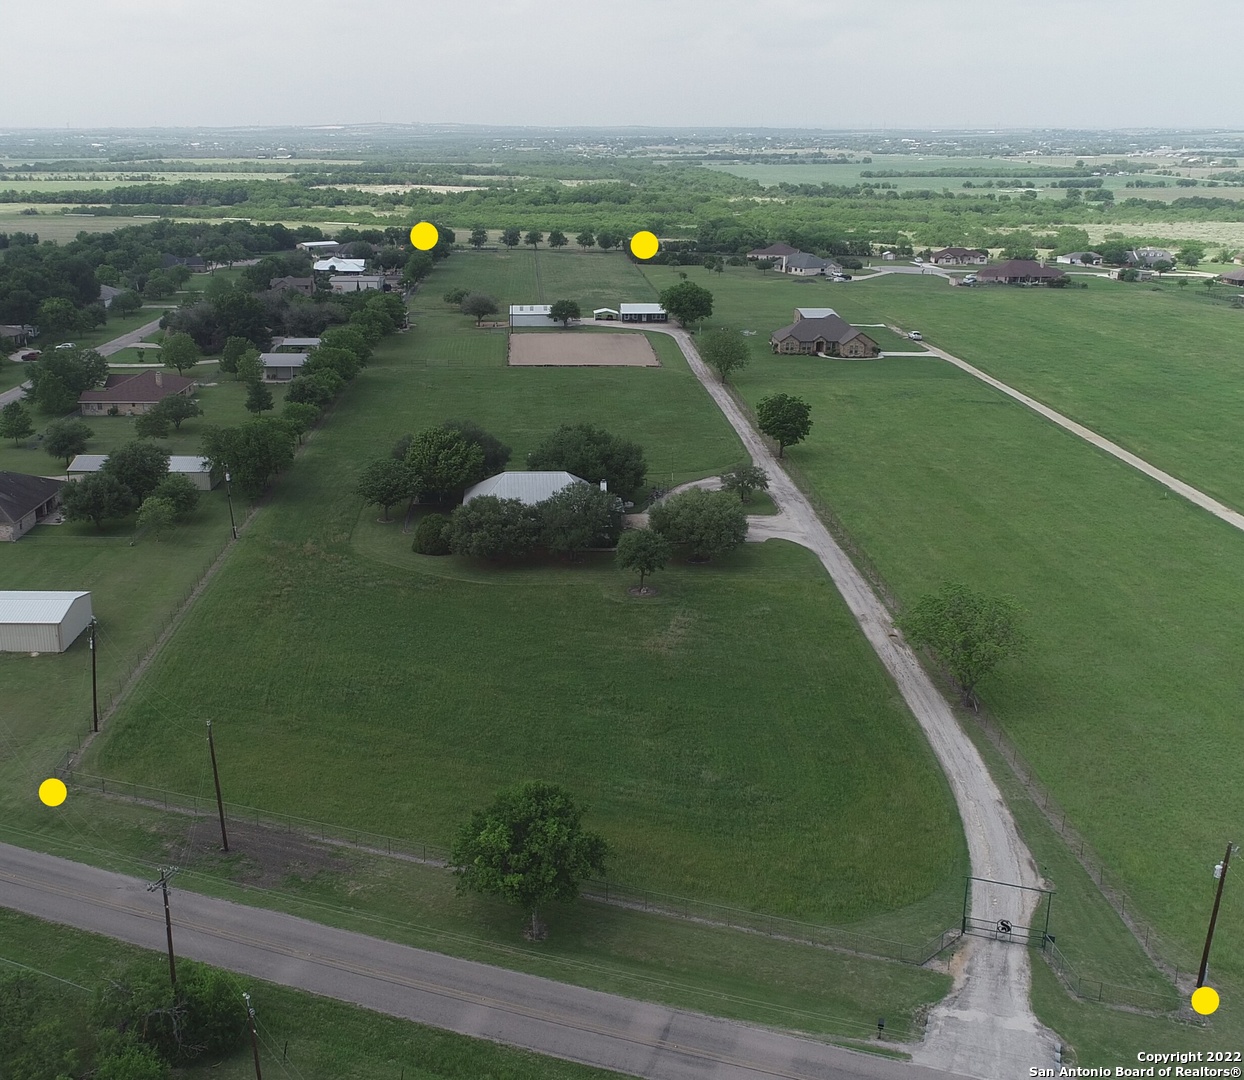 Horse lover's dream property. 2 separate homes on 10 acres. Immaculate and meticulously maintained with everything a person could want or need in highly desirable Marion TX located in Guadalupe County. 10 acres, 2 houses, 2 outbuildings/shops, 4 stall barn, arena, 3 pastures, and coastal fields used for hay production. Main house is 2893sqft and the guesthouse is a one bedroom 1080sqft home that is perfect for the parents. The barn has indoor/outdoor wash racks, large tack room and attached hay storage. Entire property is fenced and cross fenced. Income producing potential as there is a huge demand for horse boarding facilities and rental properties (second home).